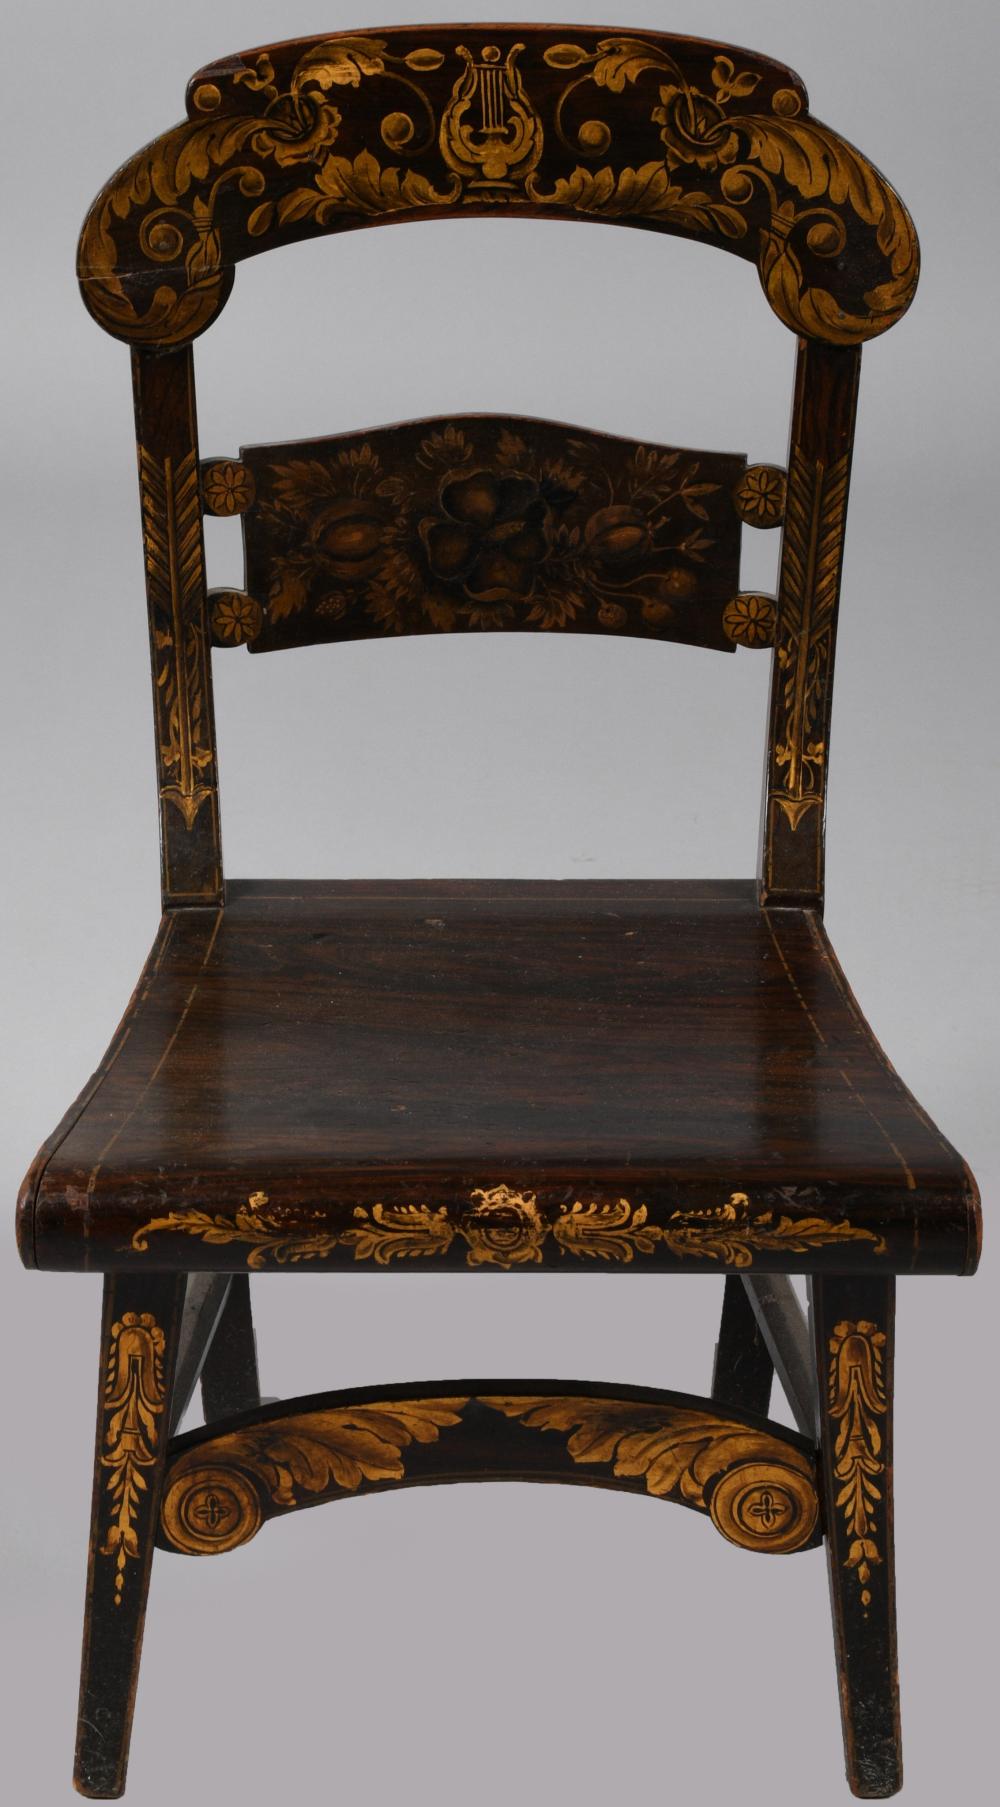 NEW YORK CLASSICAL STYLE GILT-STENCILED